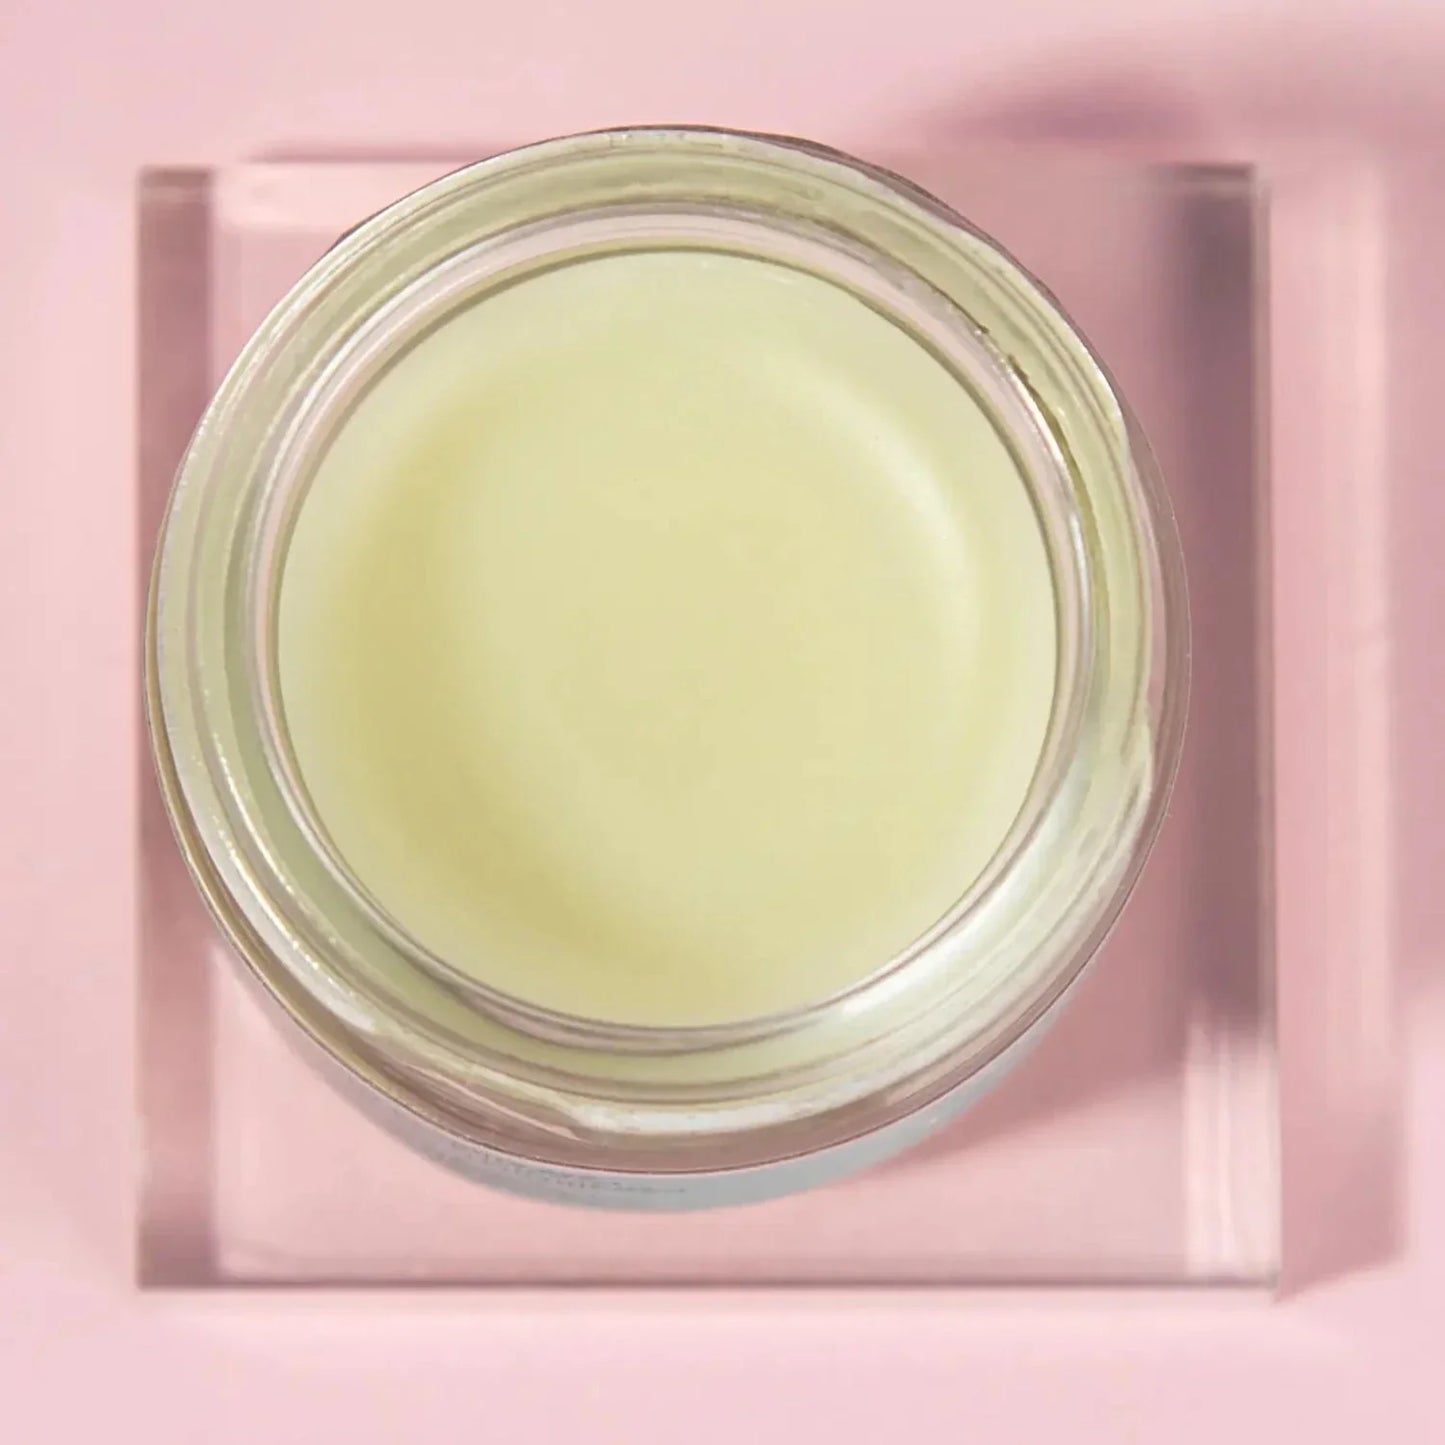 Hydrating Cuticle Balm and Nail Restorer in Glass Jar